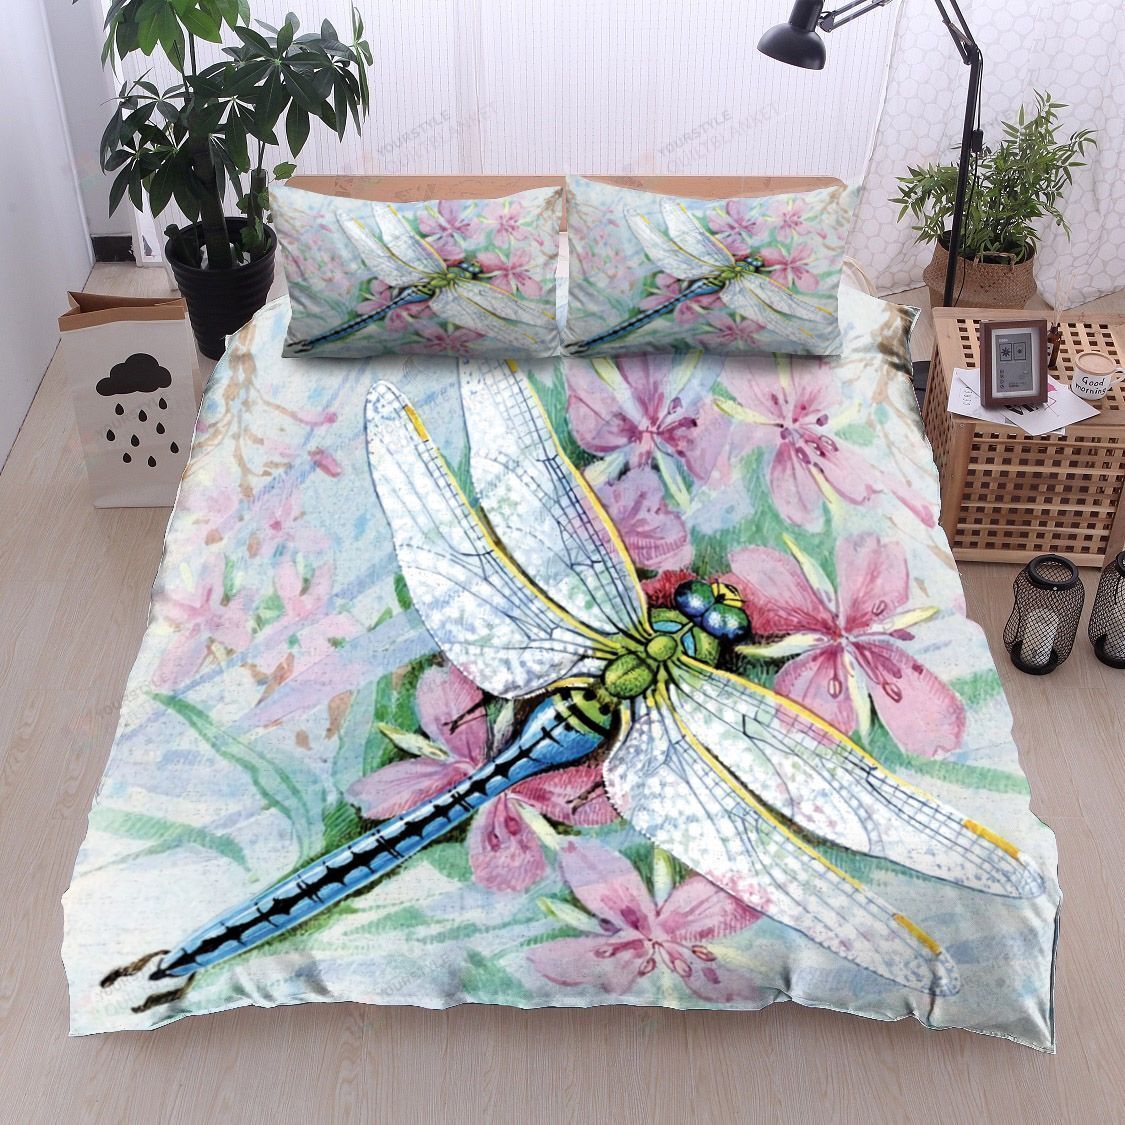 Dragonfly Cotton Bed Sheets Spread Comforter Duvet Cover Bedding Sets